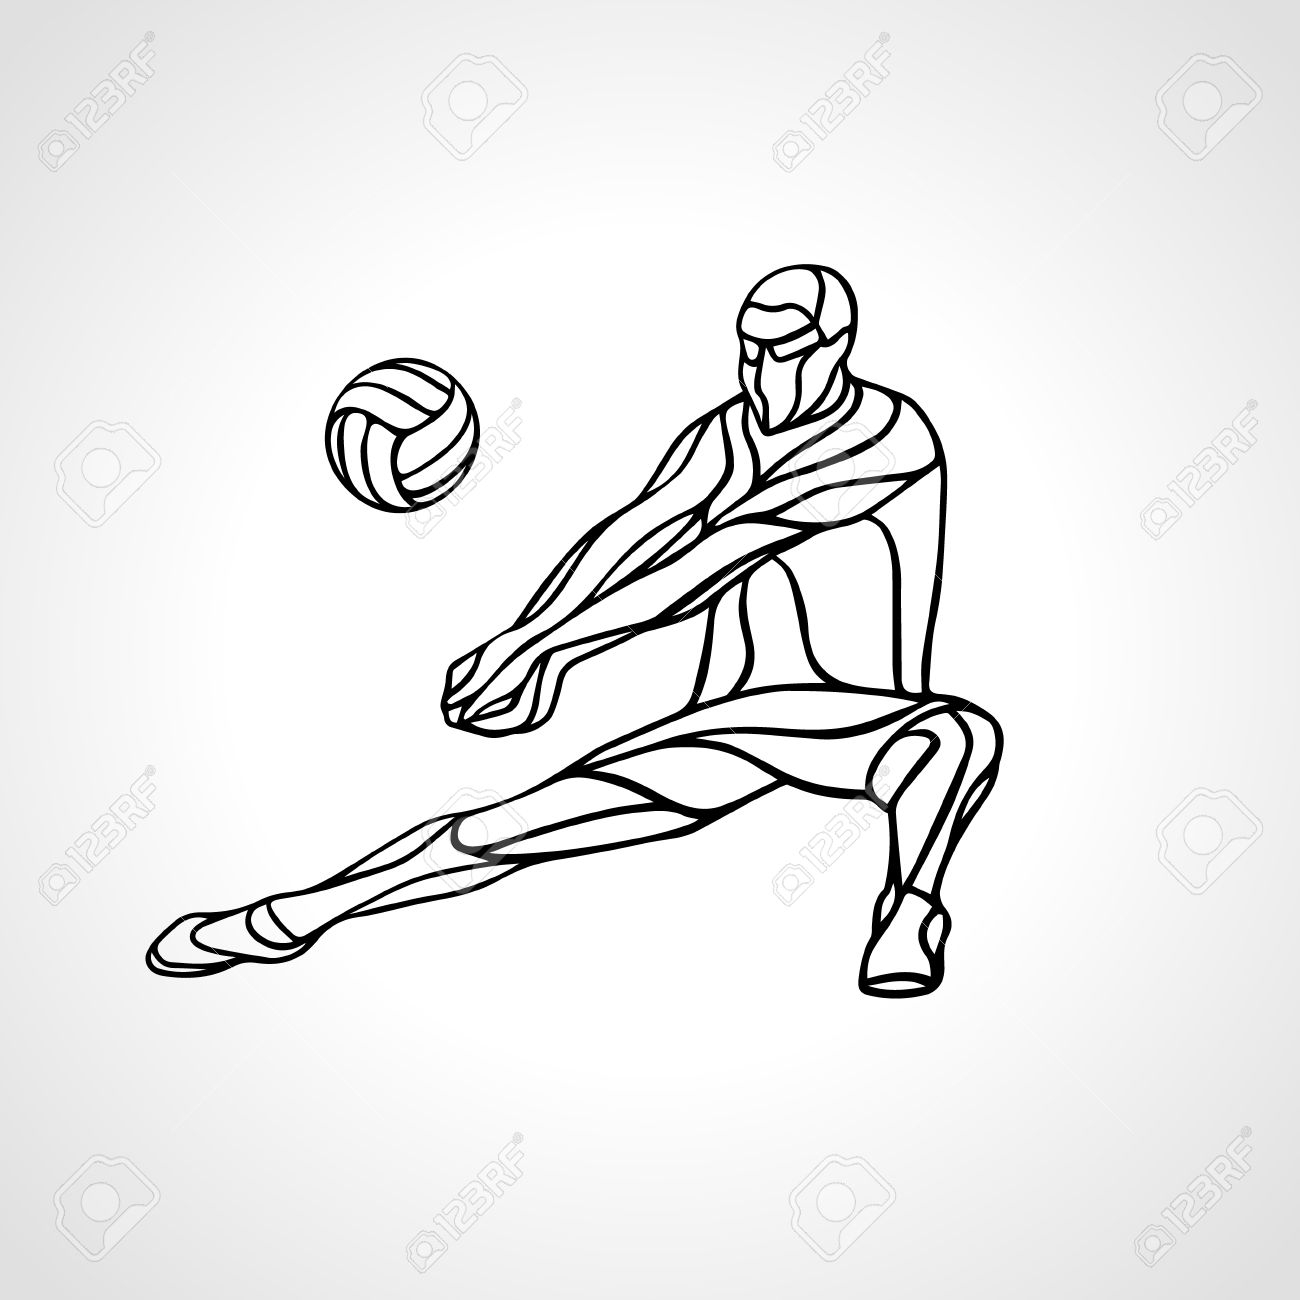 Abstract Volleyball Clipart.